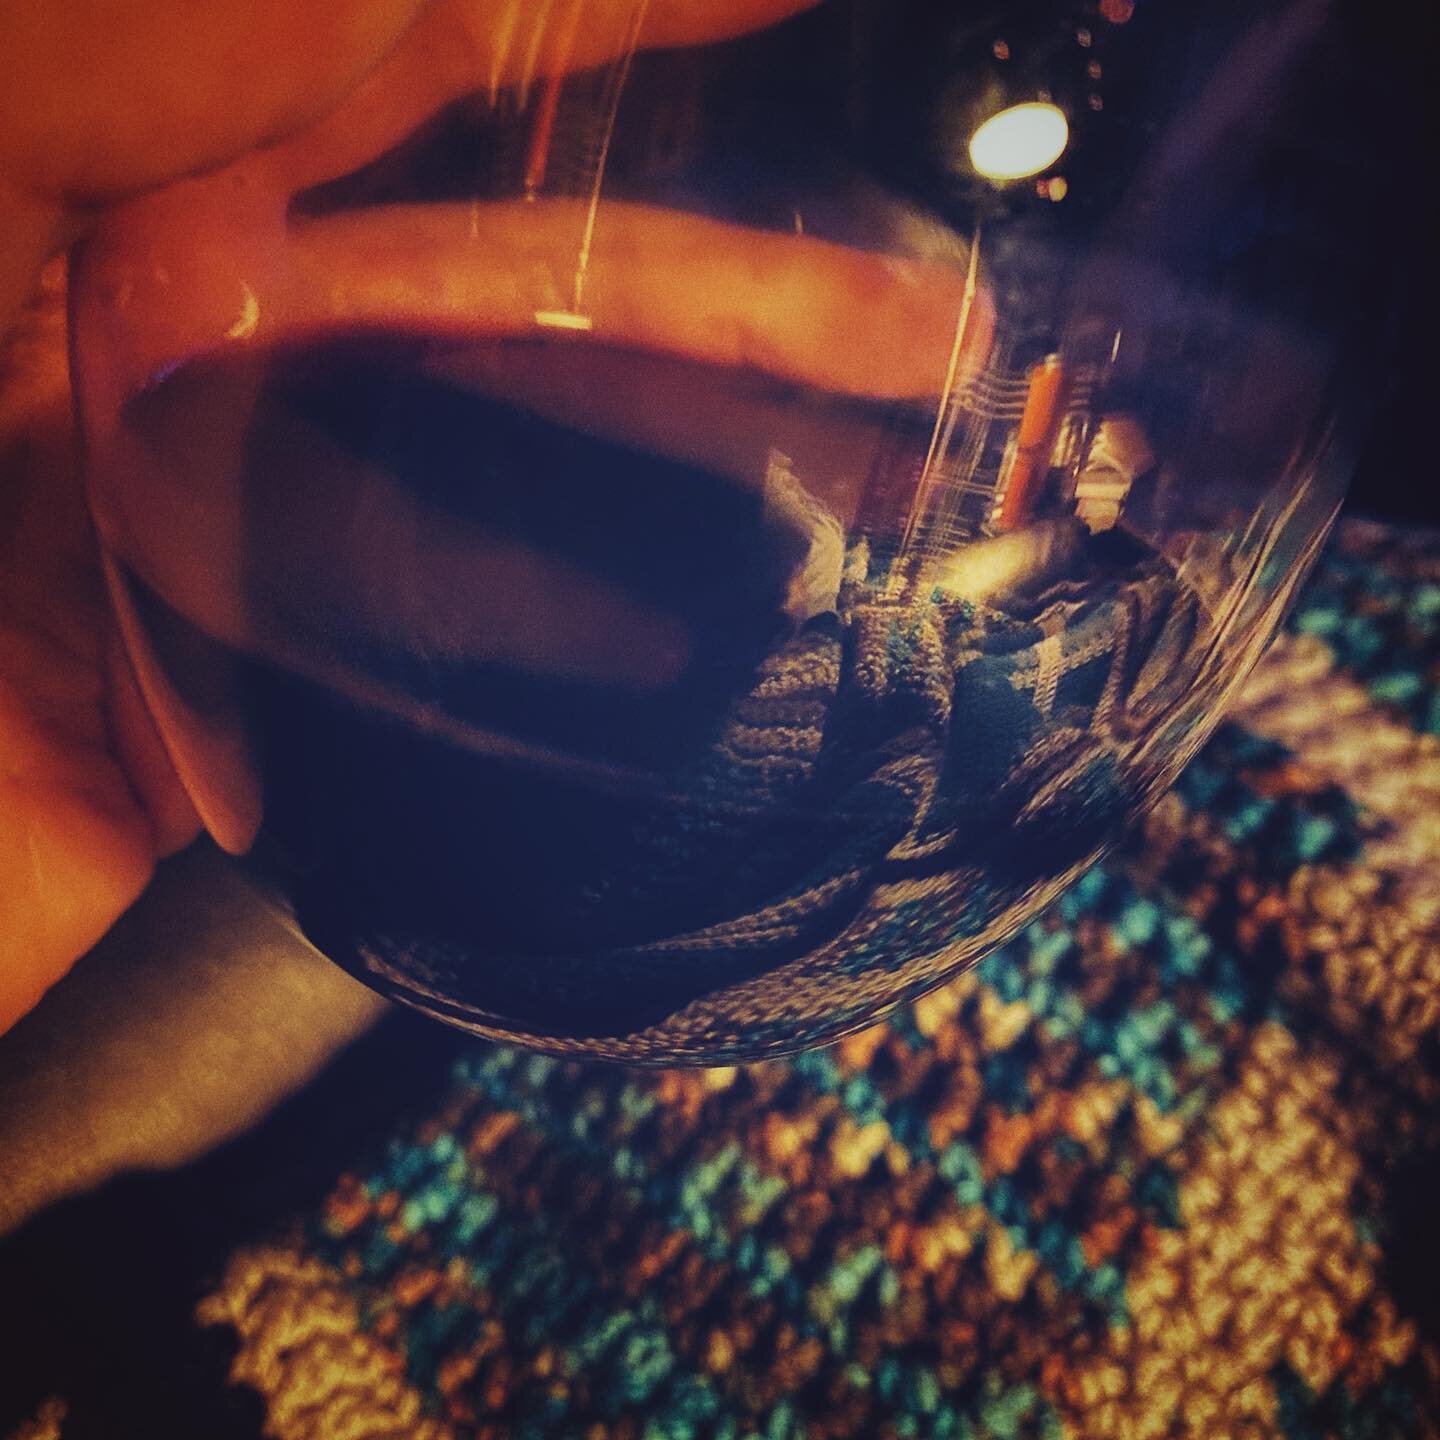 Let the long weekend begin.
.
.
.
#wine #whew #redallday